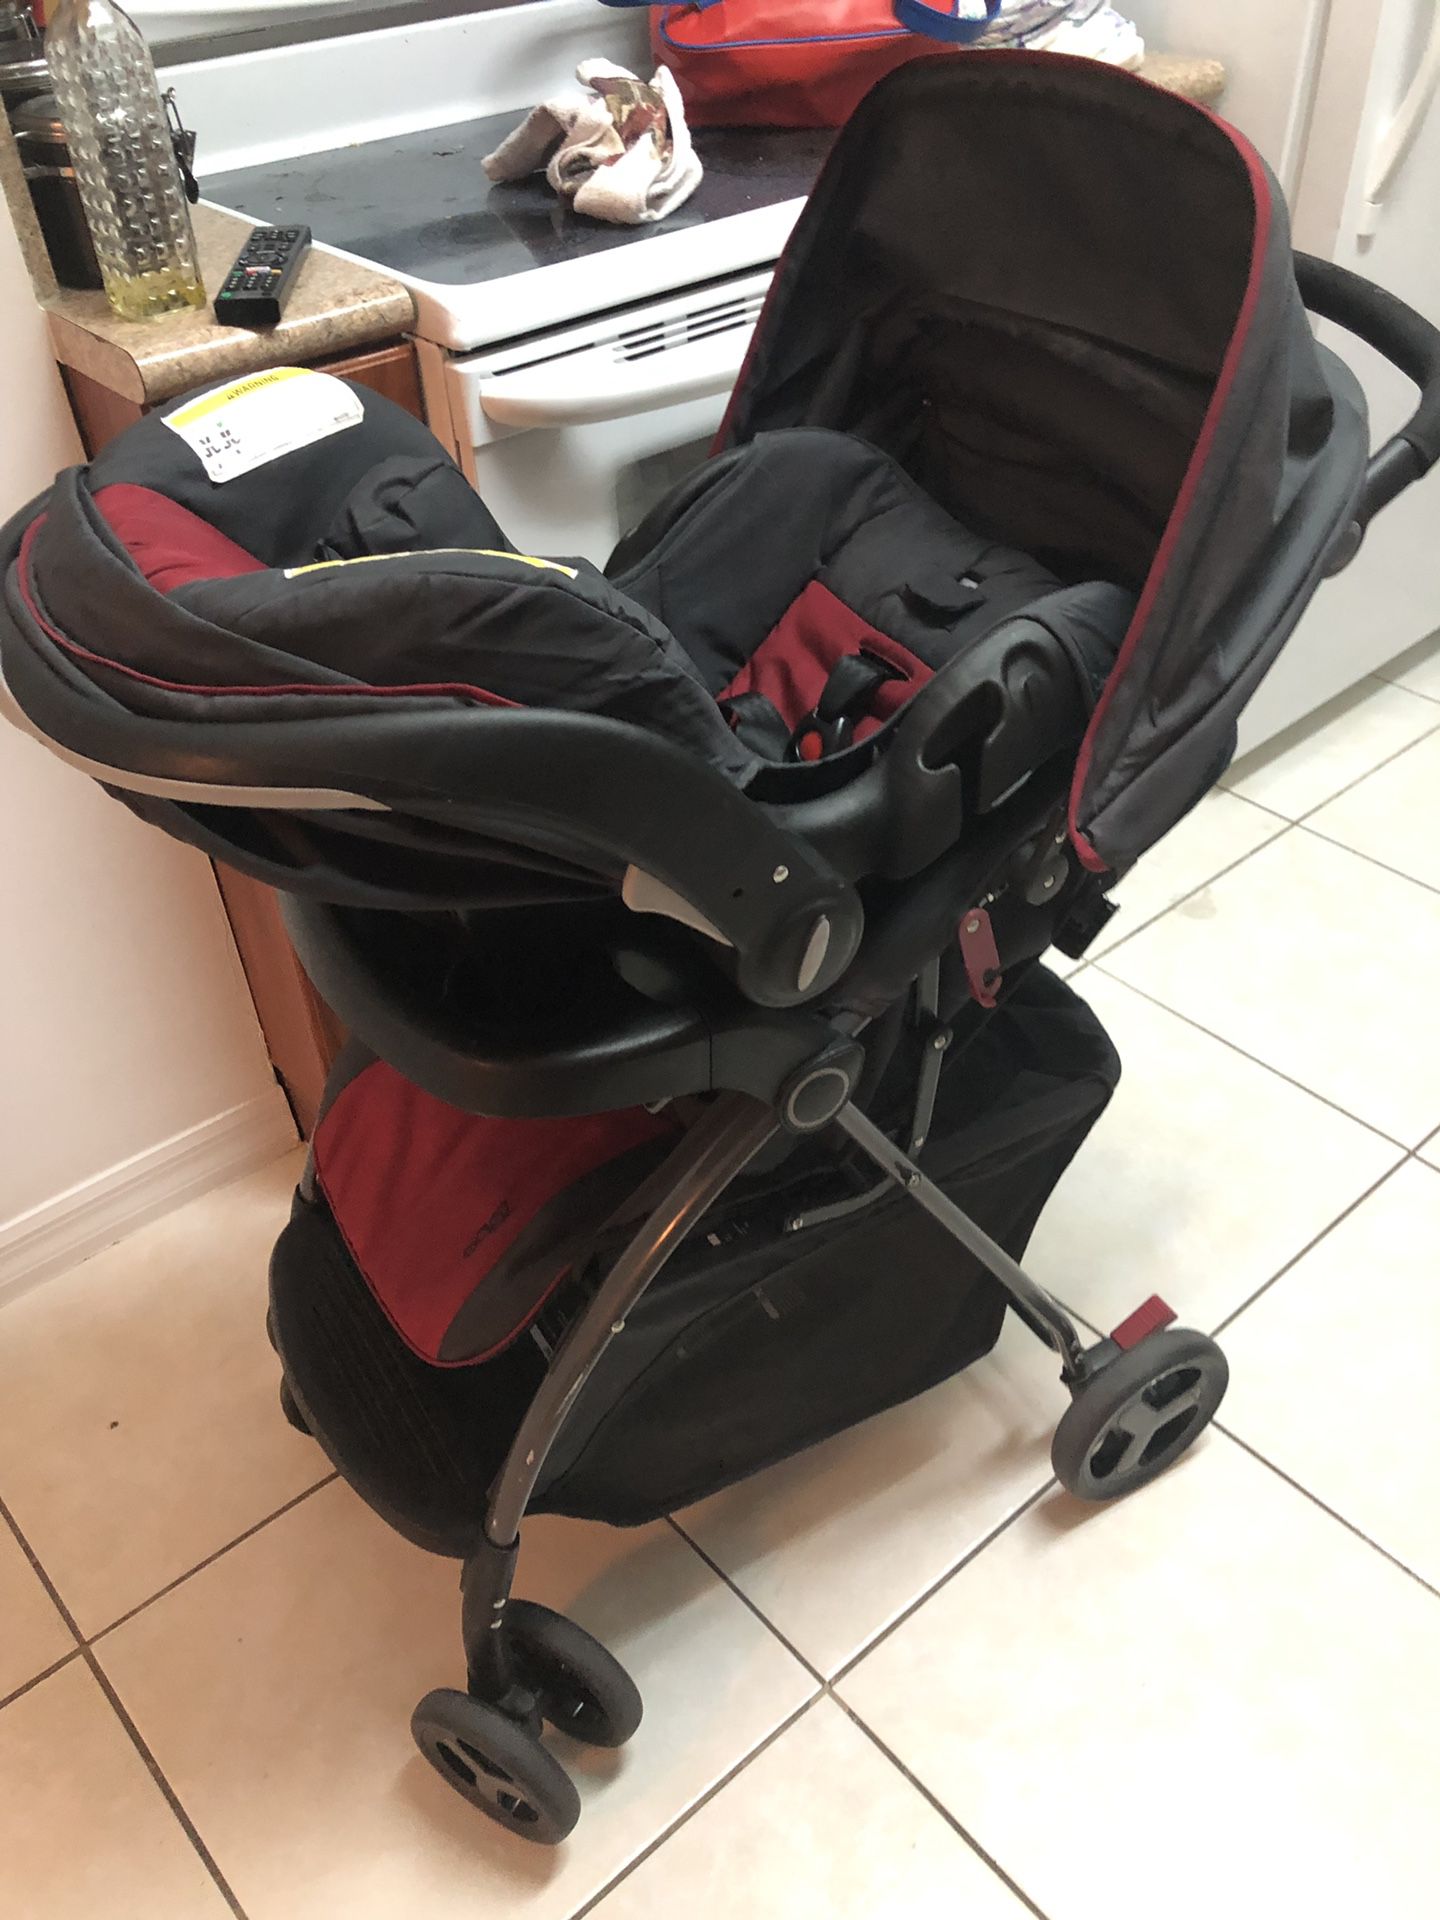 Graco stroller car seat with base